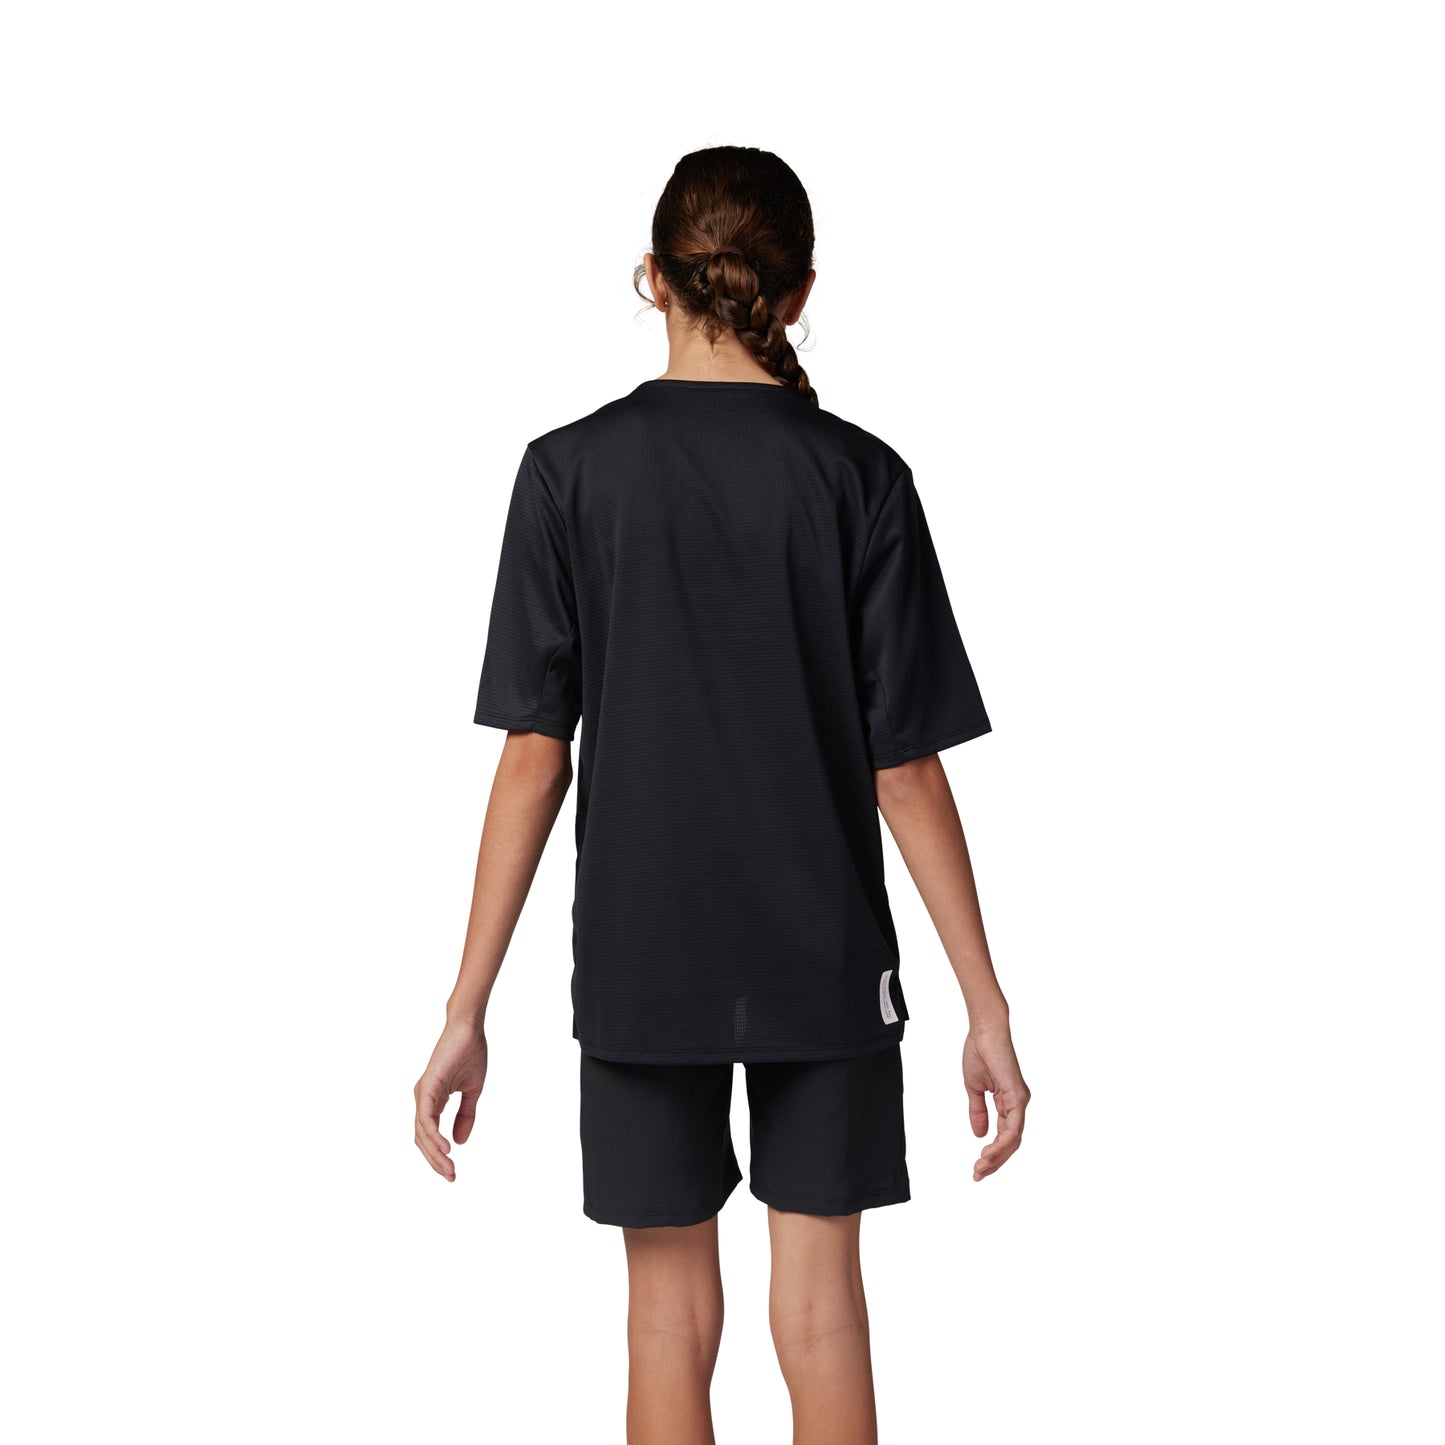 Fox Defend Youth Short Sleeve Jersey - Youth L - Black - Image 2